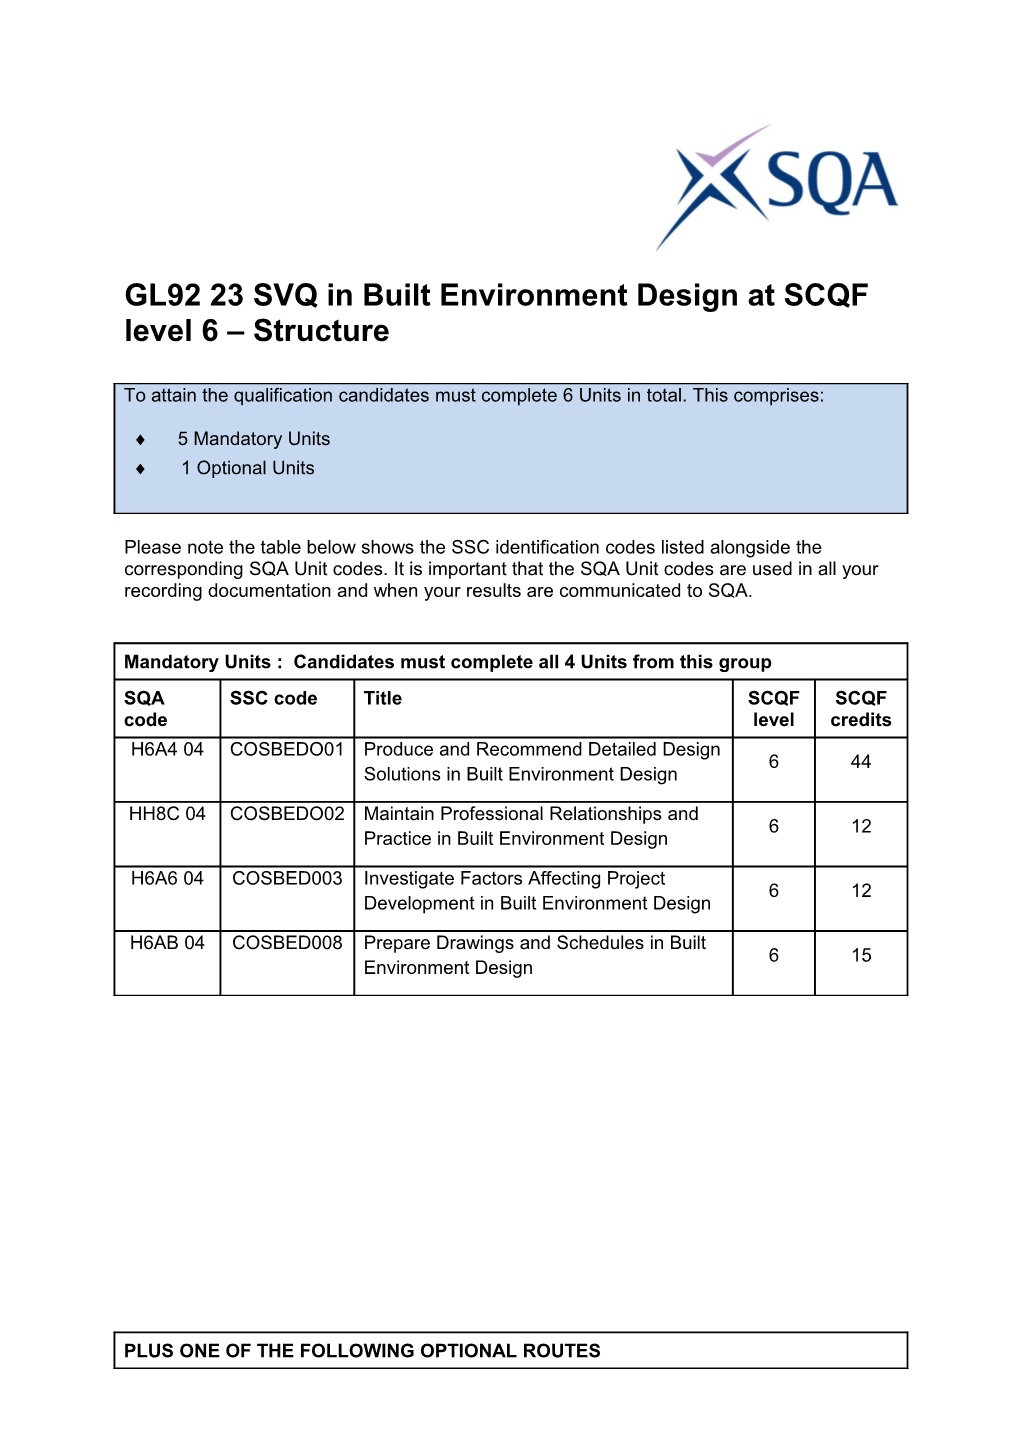 GL92 23 SVQ in Built Environment Design at SCQF Level 6 Structure